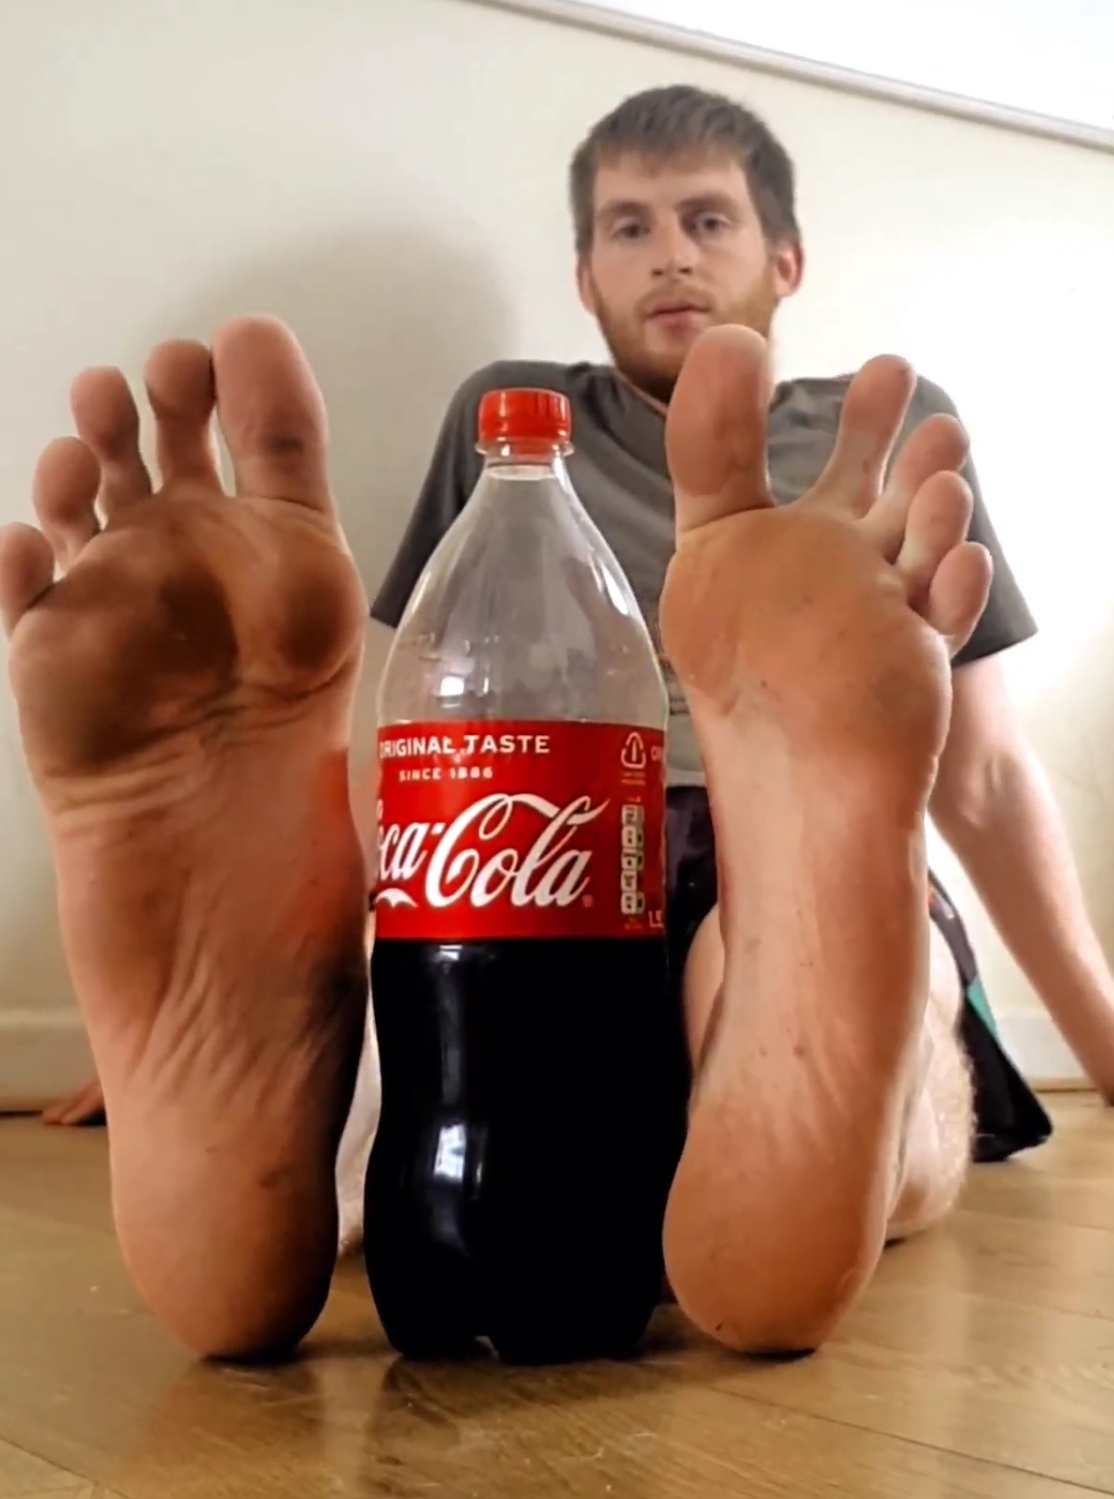 CARL GRIFFITHS compares his huge feet to objects (size 22 US)